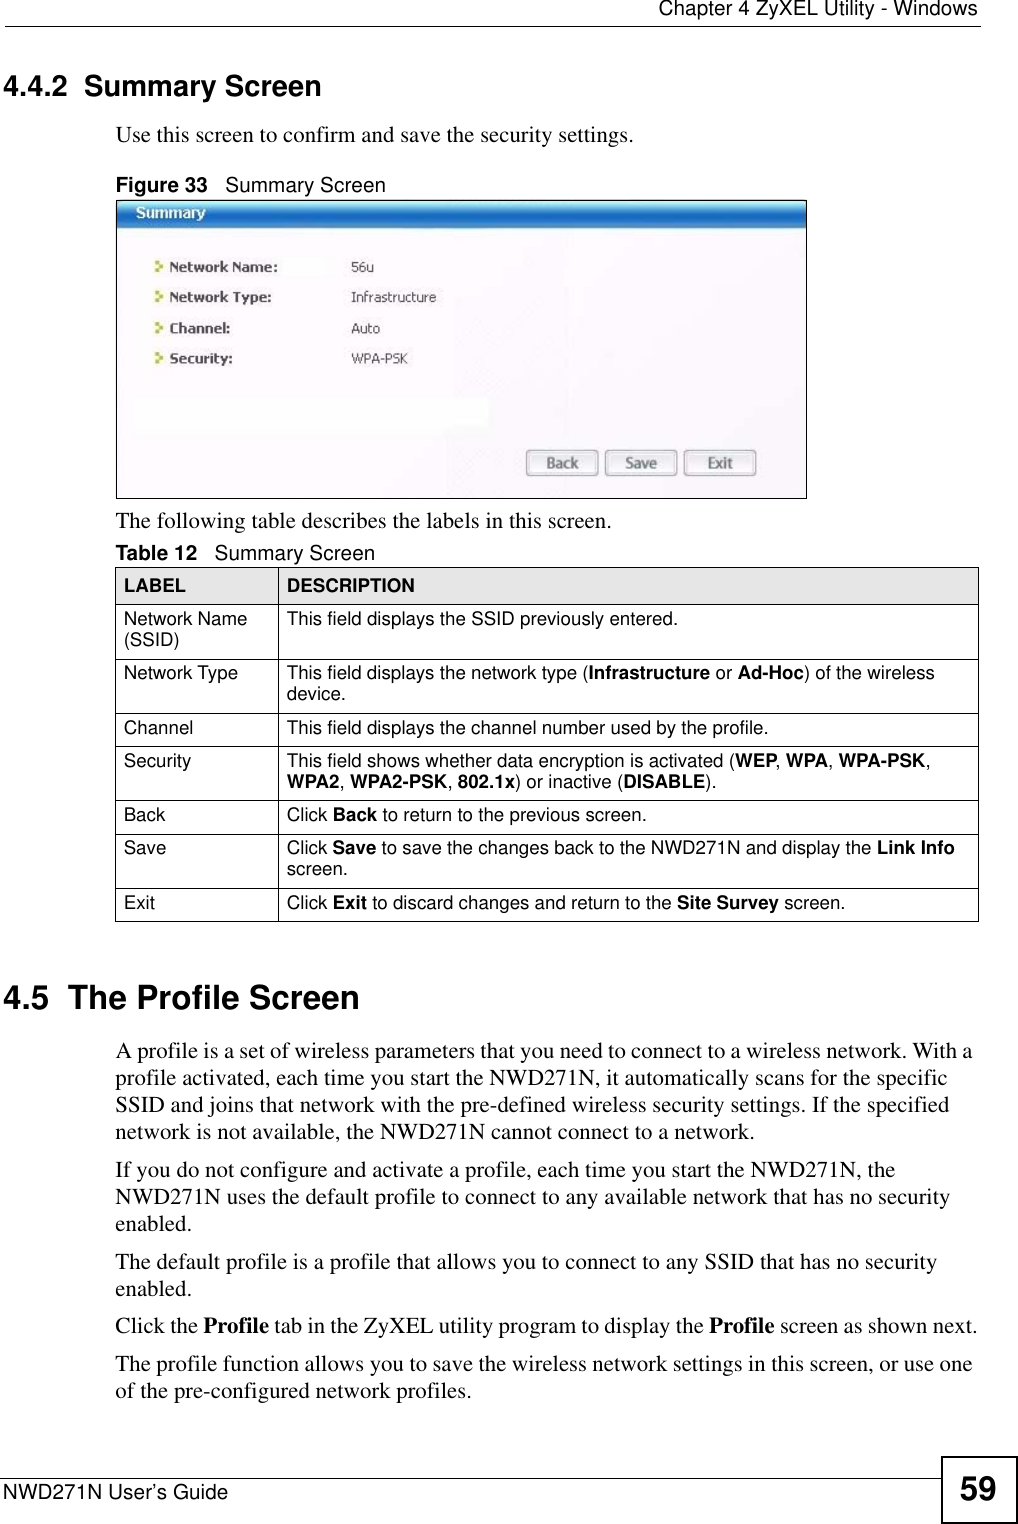  Chapter 4 ZyXEL Utility - WindowsNWD271N User’s Guide 594.4.2  Summary ScreenUse this screen to confirm and save the security settings. Figure 33   Summary Screen The following table describes the labels in this screen.  4.5  The Profile Screen A profile is a set of wireless parameters that you need to connect to a wireless network. With a profile activated, each time you start the NWD271N, it automatically scans for the specific SSID and joins that network with the pre-defined wireless security settings. If the specified network is not available, the NWD271N cannot connect to a network.If you do not configure and activate a profile, each time you start the NWD271N, the NWD271N uses the default profile to connect to any available network that has no security enabled. The default profile is a profile that allows you to connect to any SSID that has no security enabled. Click the Profile tab in the ZyXEL utility program to display the Profile screen as shown next.The profile function allows you to save the wireless network settings in this screen, or use one of the pre-configured network profiles.Table 12   Summary ScreenLABEL DESCRIPTIONNetwork Name (SSID) This field displays the SSID previously entered.Network Type This field displays the network type (Infrastructure or Ad-Hoc) of the wireless device.Channel This field displays the channel number used by the profile.Security This field shows whether data encryption is activated (WEP, WPA, WPA-PSK, WPA2, WPA2-PSK, 802.1x) or inactive (DISABLE).Back Click Back to return to the previous screen.Save Click Save to save the changes back to the NWD271N and display the Link Info screen. Exit Click Exit to discard changes and return to the Site Survey screen.